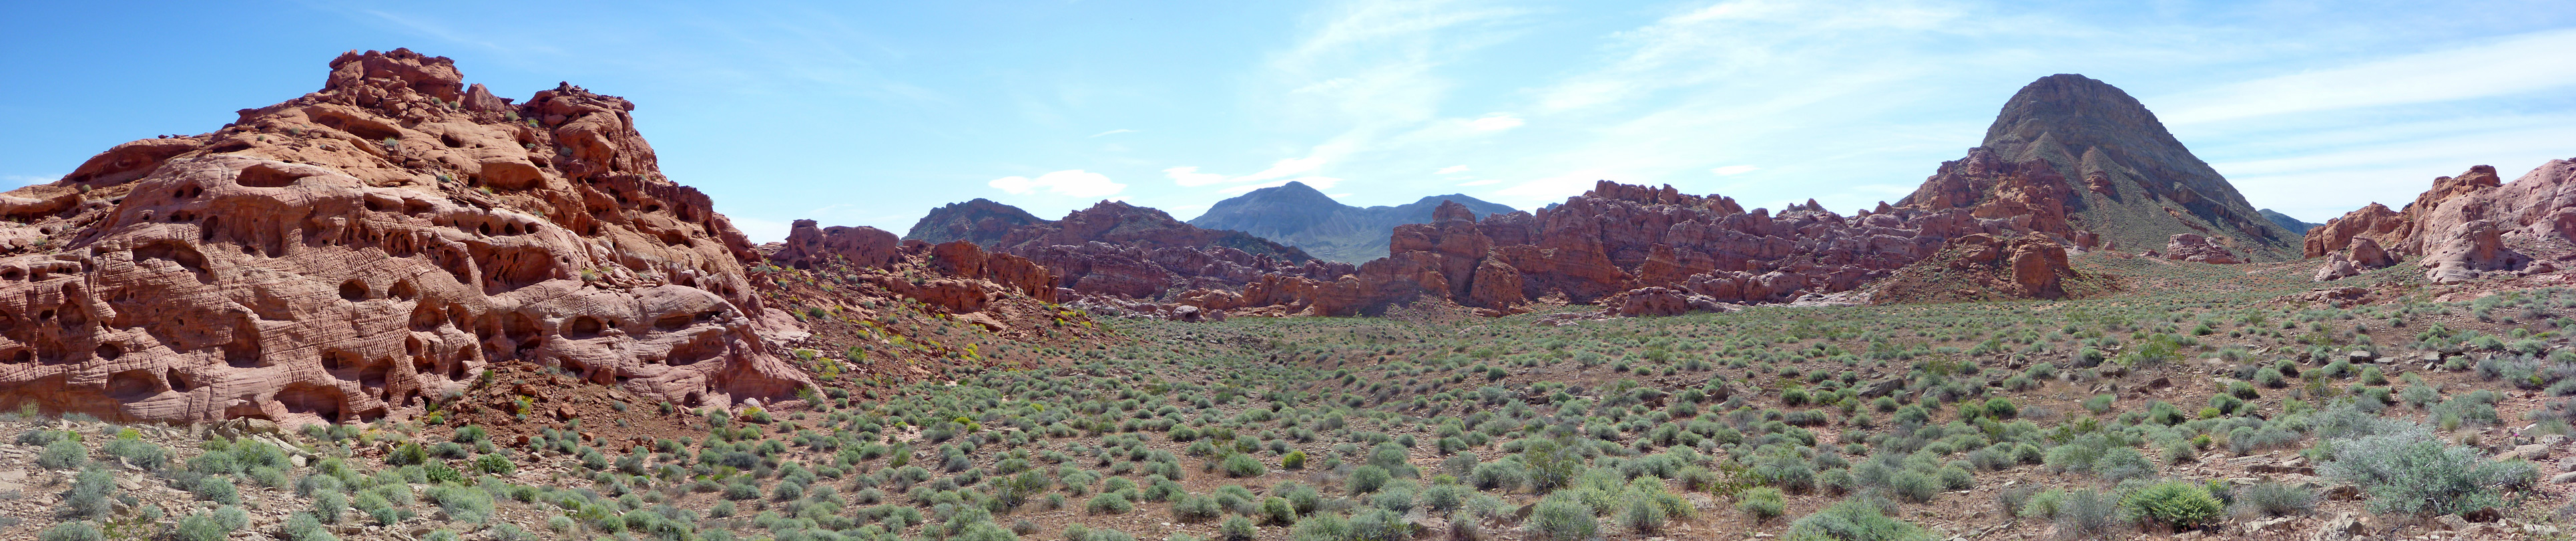 Red mounds and a sagebrush valley